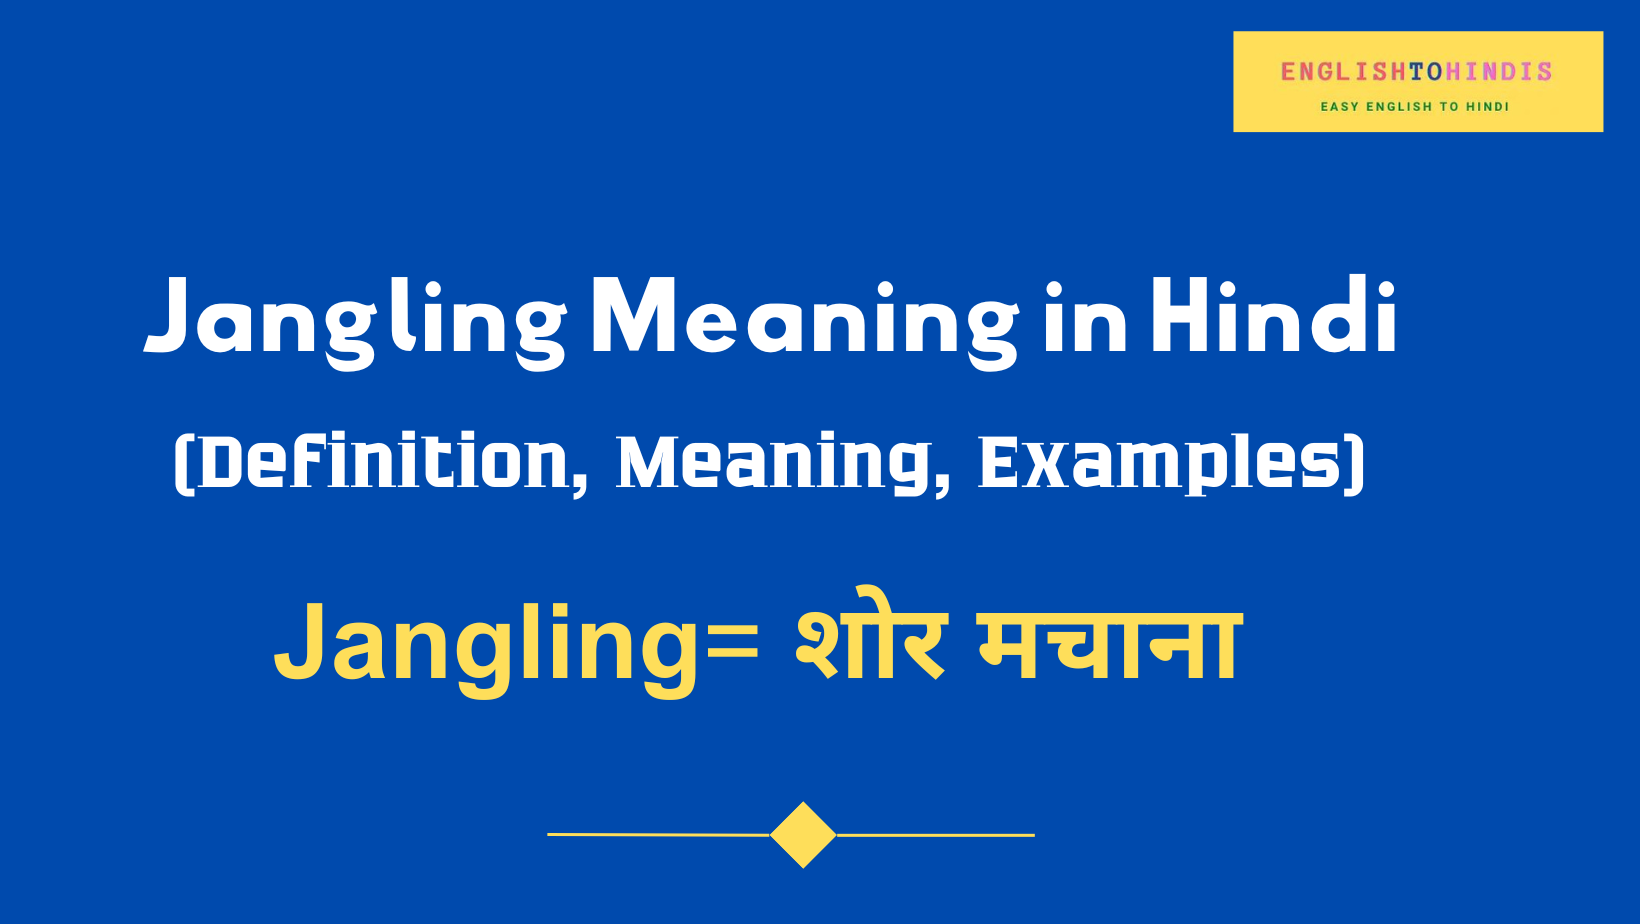 Jangling meaning in Hindi